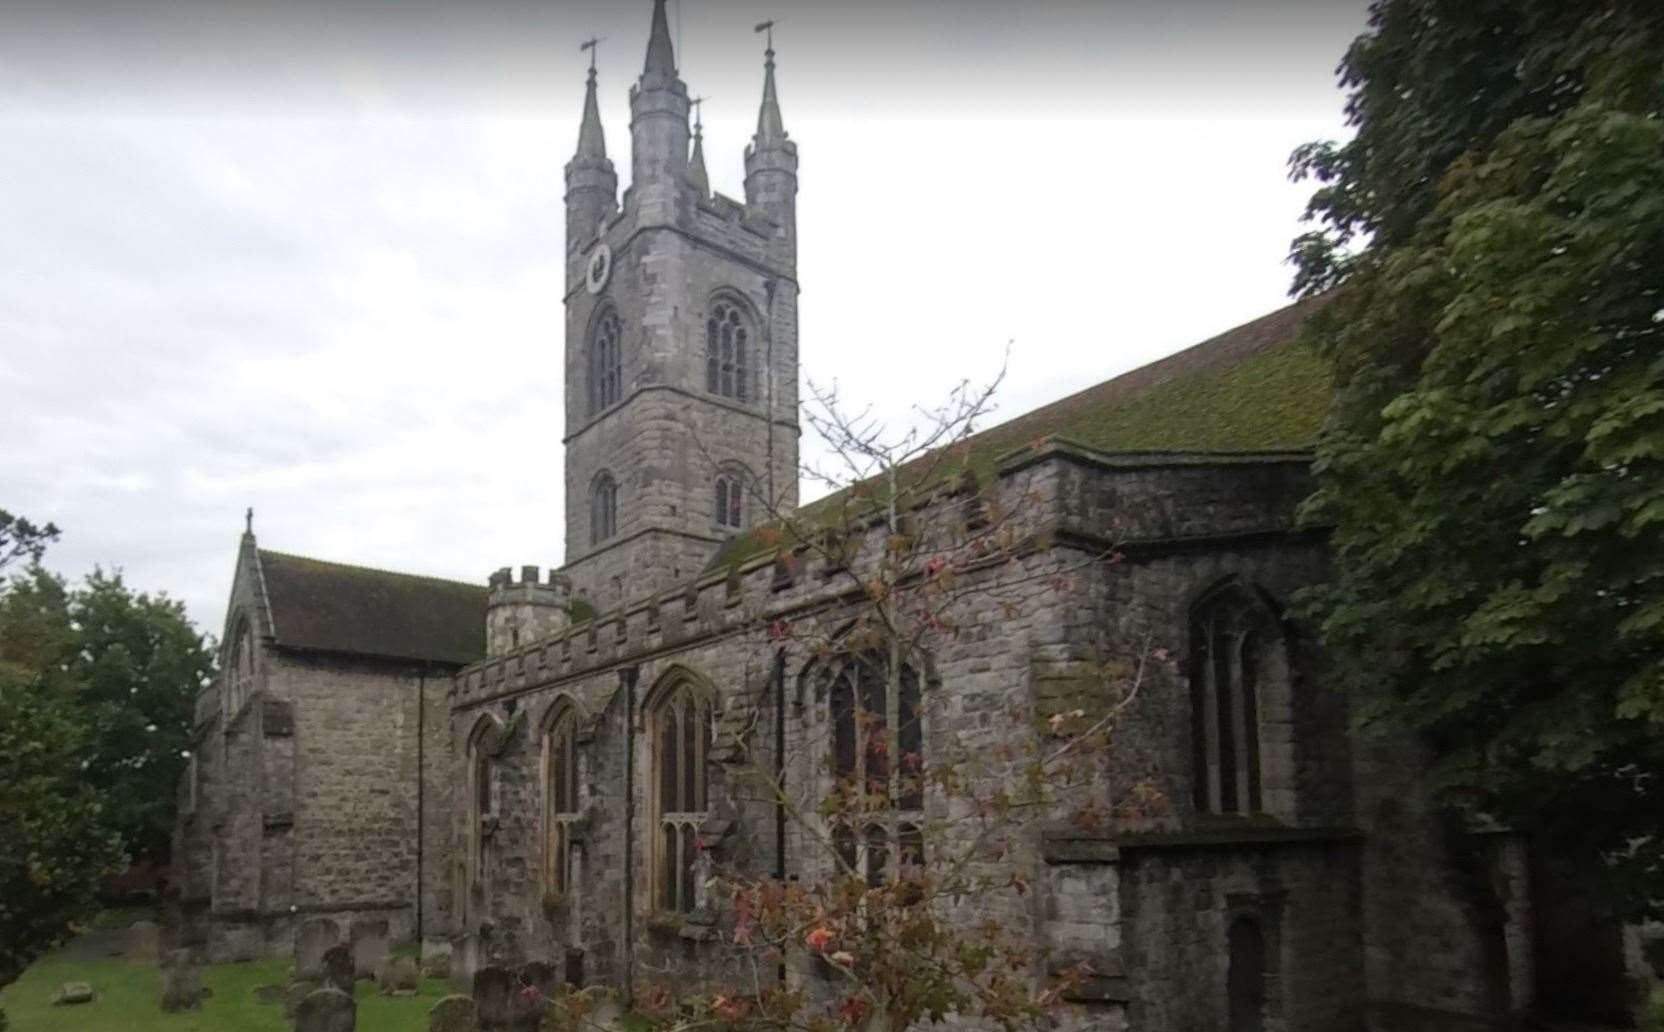 The events take place inside the church. Image: Google Maps